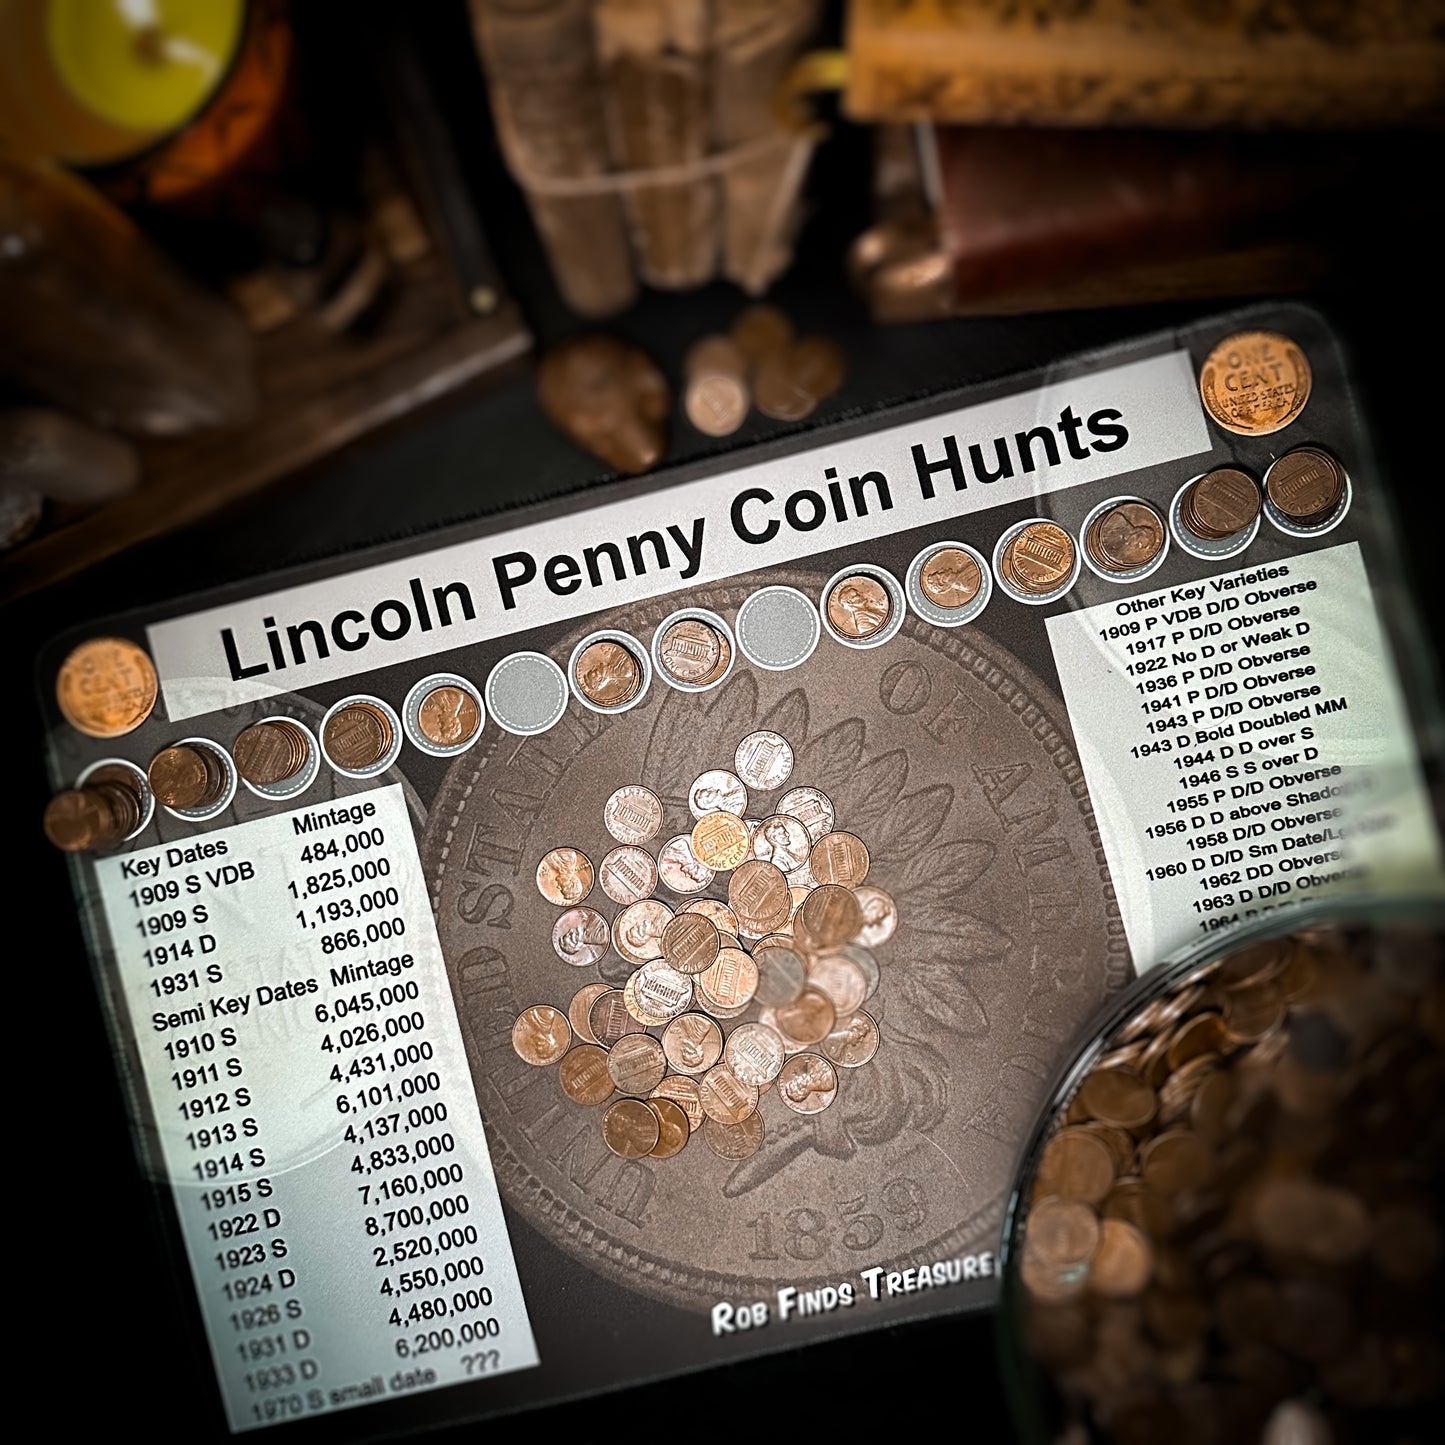 Layout with coins of a penny coin roll hunting mat made by Rob Finds Treasure featuring organized rows for stacking pennies, providing a convenient and systematic setup for searching through coins 